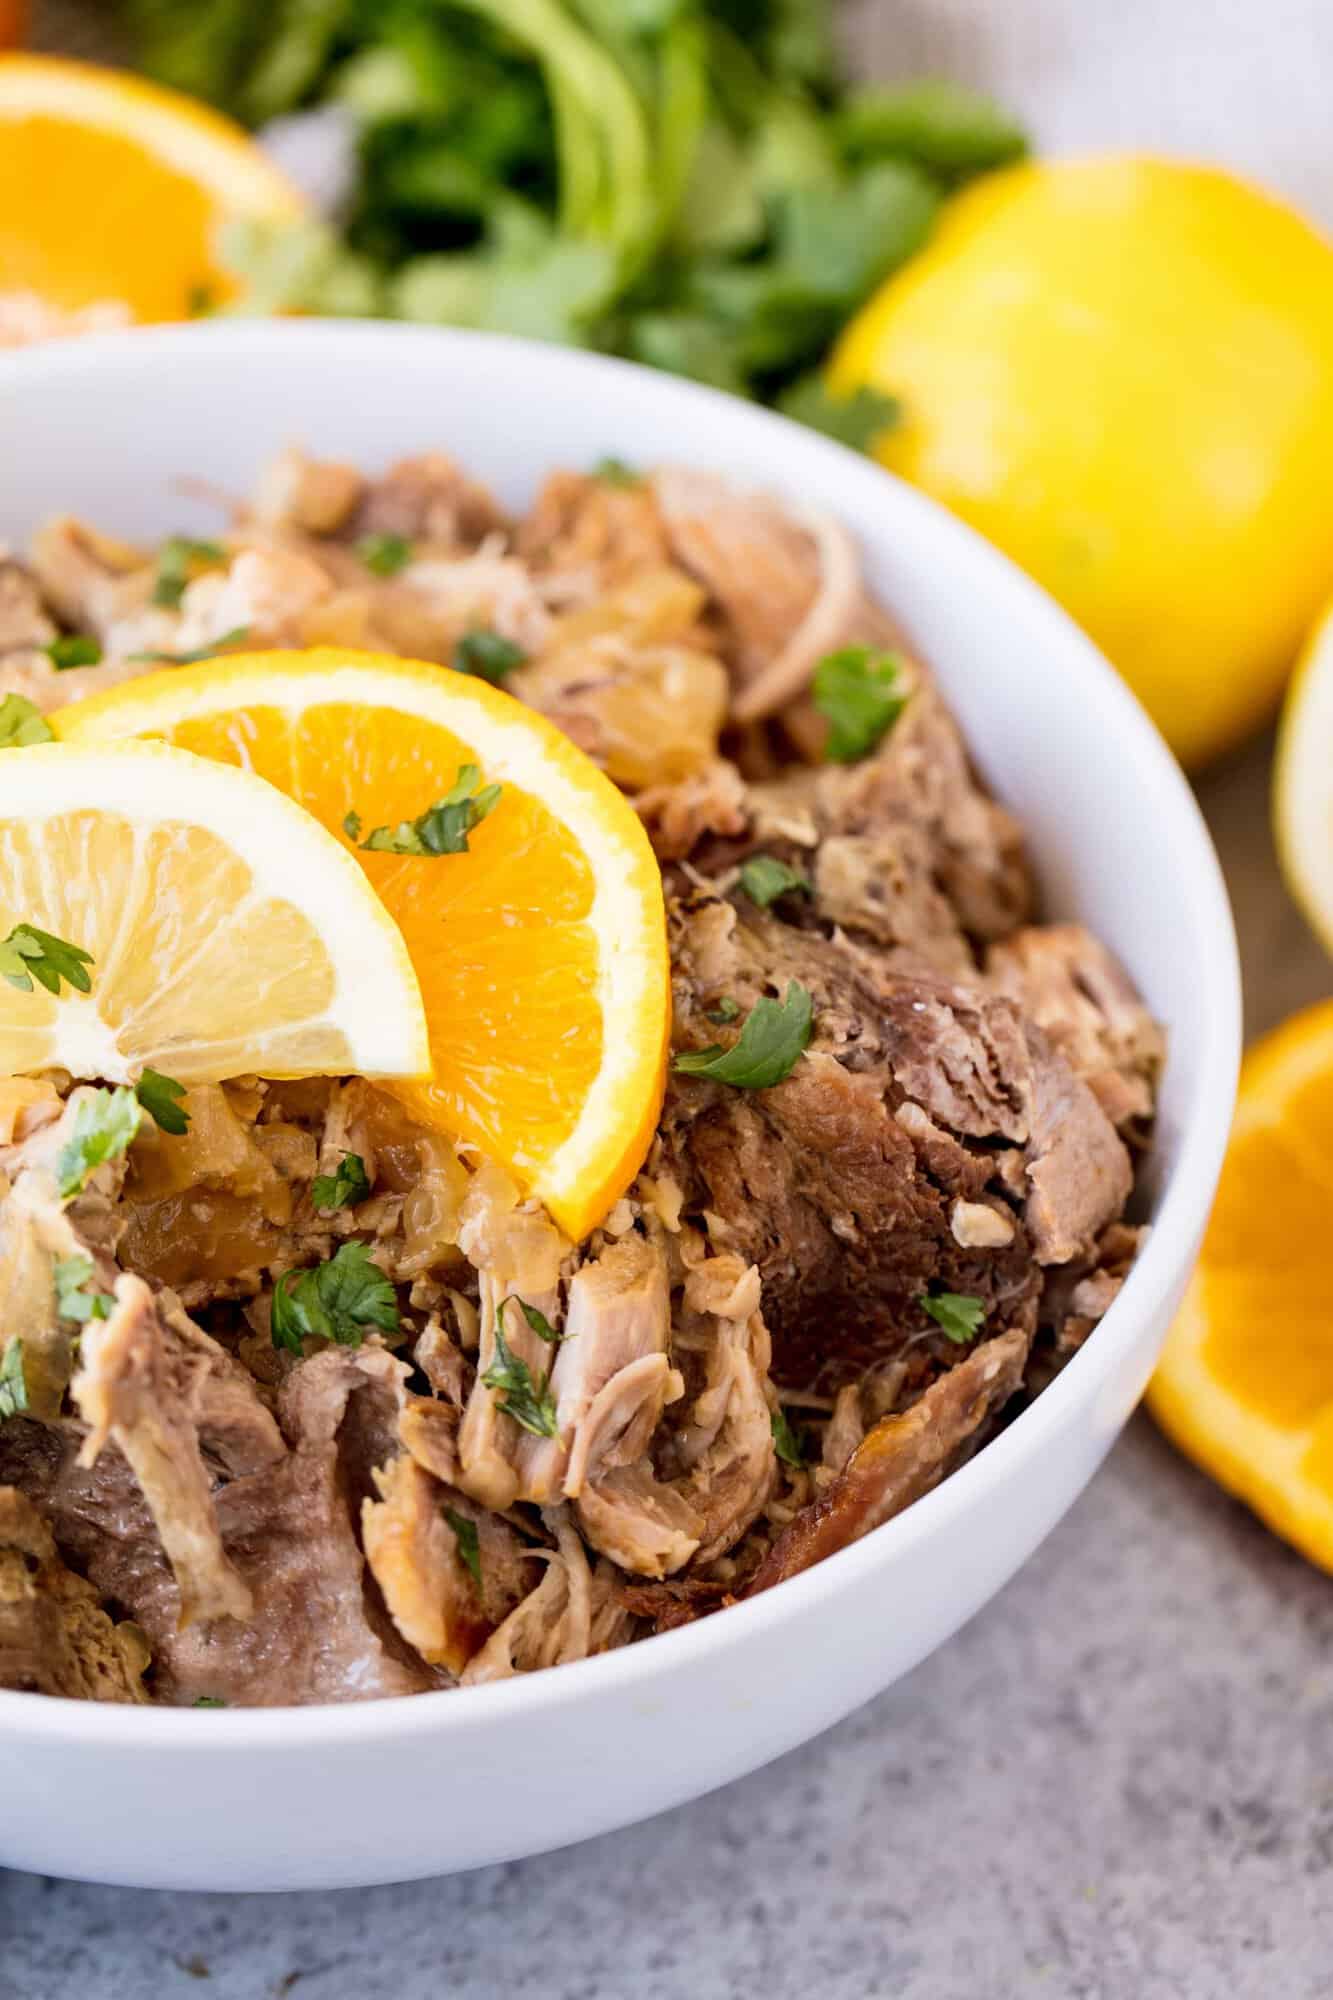 Slow Cooker Cuban Mojo Pork is tender shredded pork, slow cooked in a garlic citrus sauce. Serve it up on some toasted bread for a delicious Cuban sandwich or plain with rice and beans.